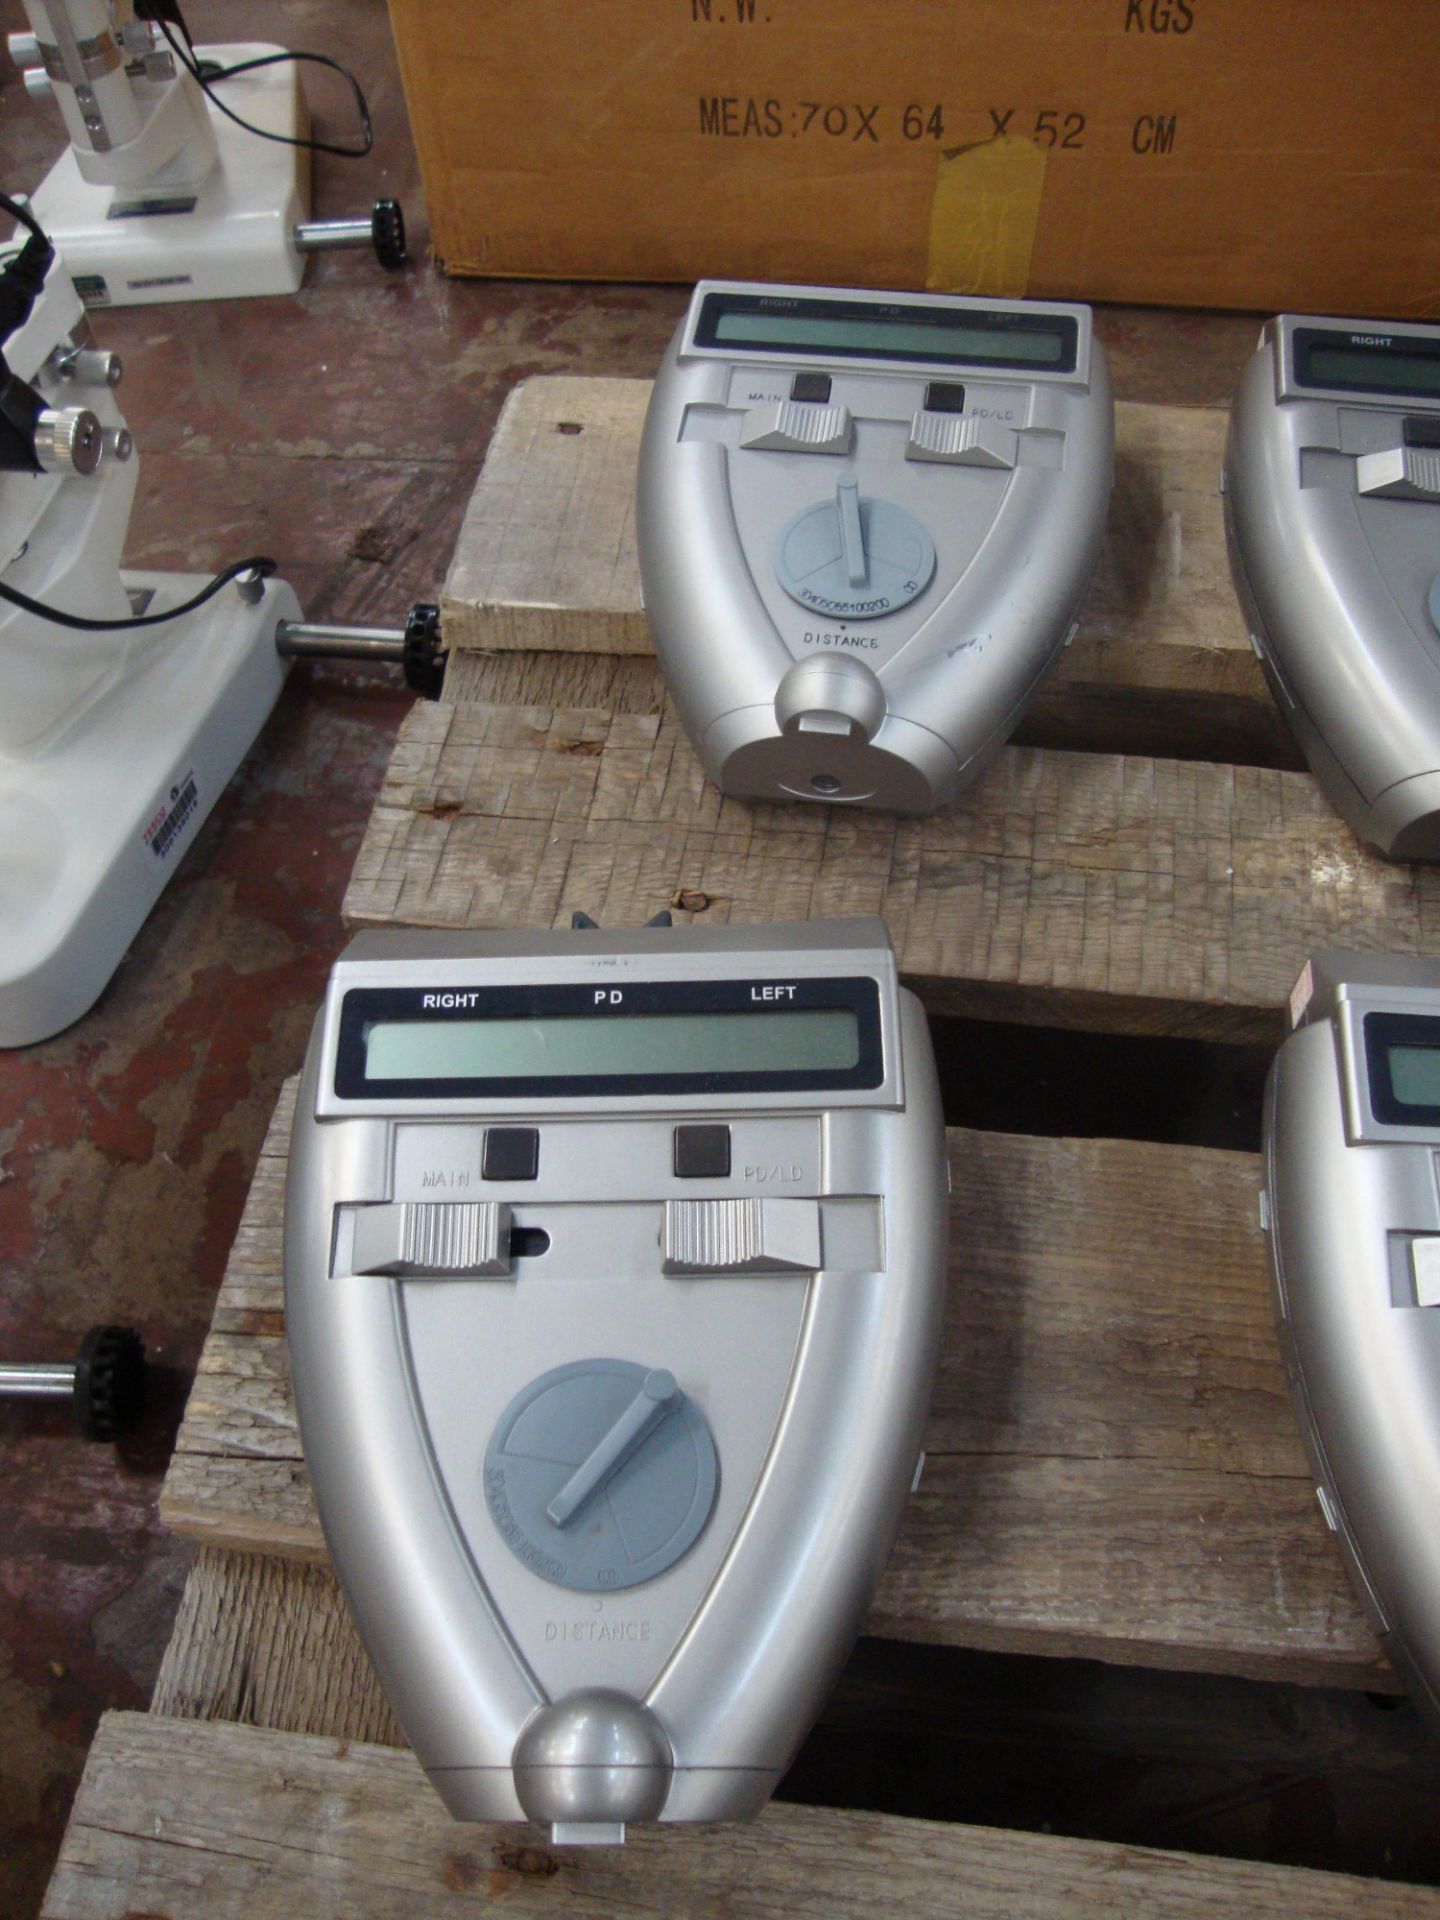 3 off model BRT-II digital PD meters All the lots in this auction are being sold on behalf of Galaxy - Image 2 of 2